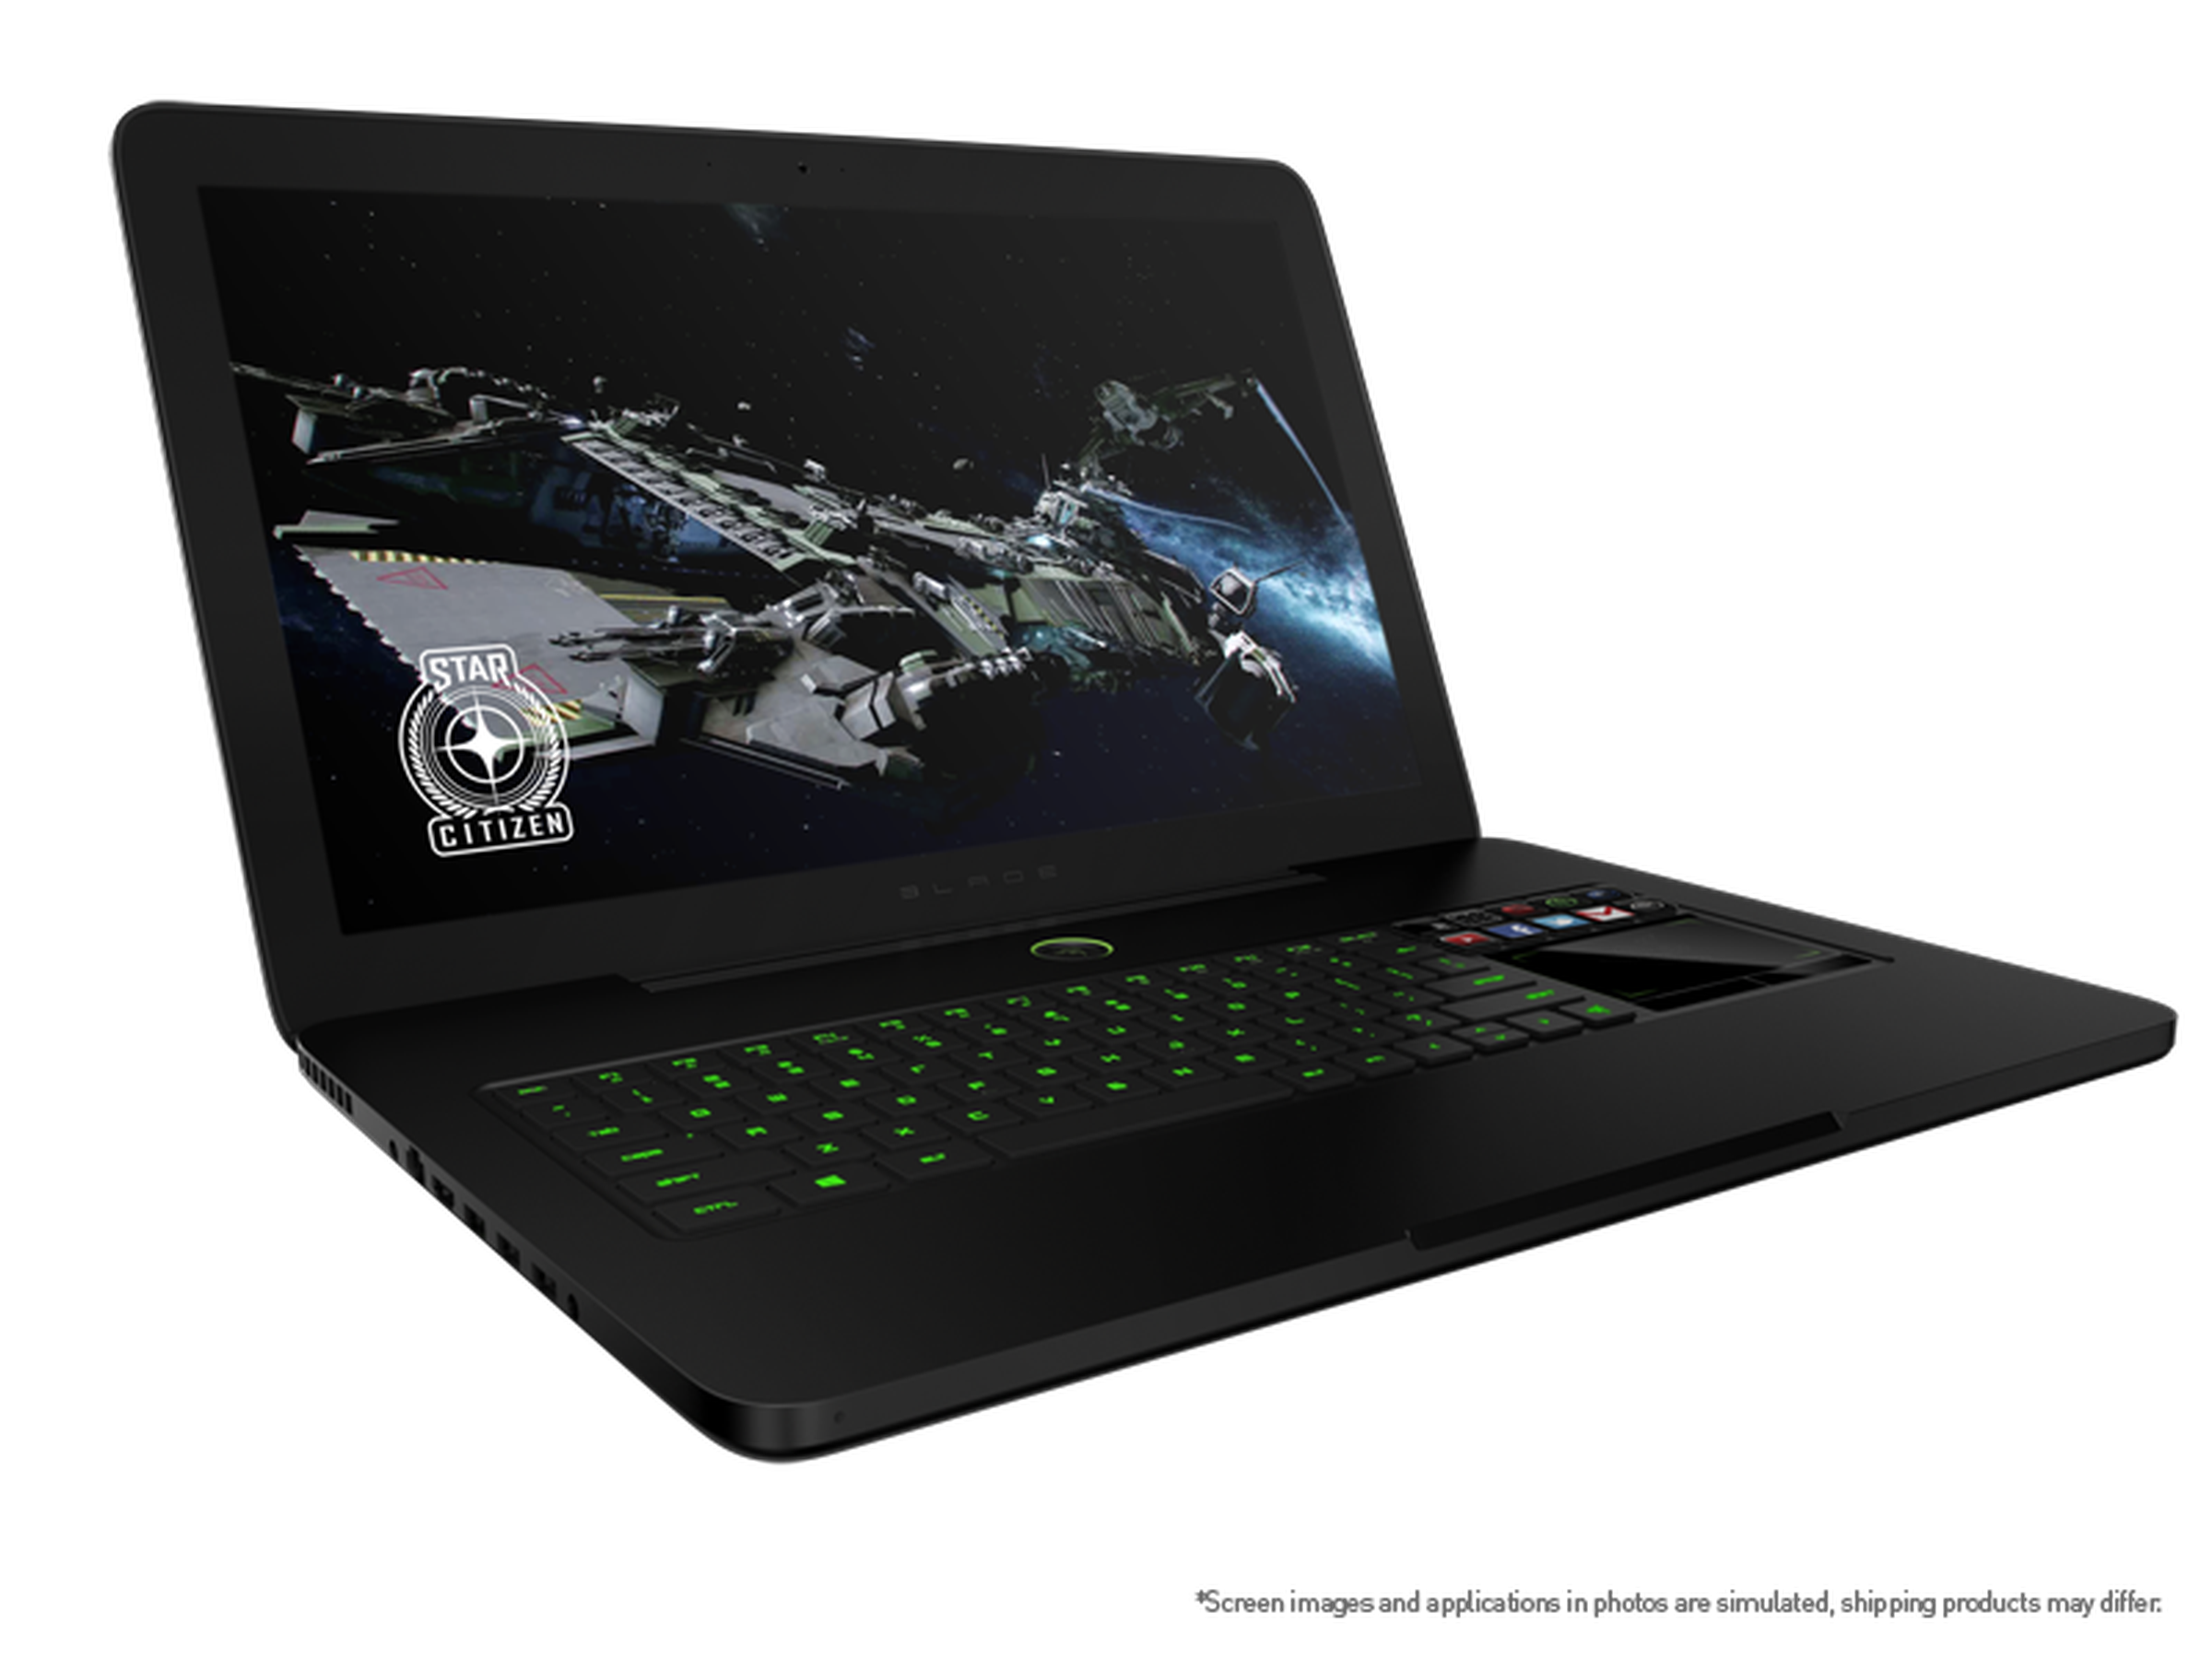 Razer Blade and Blade Pro pictures